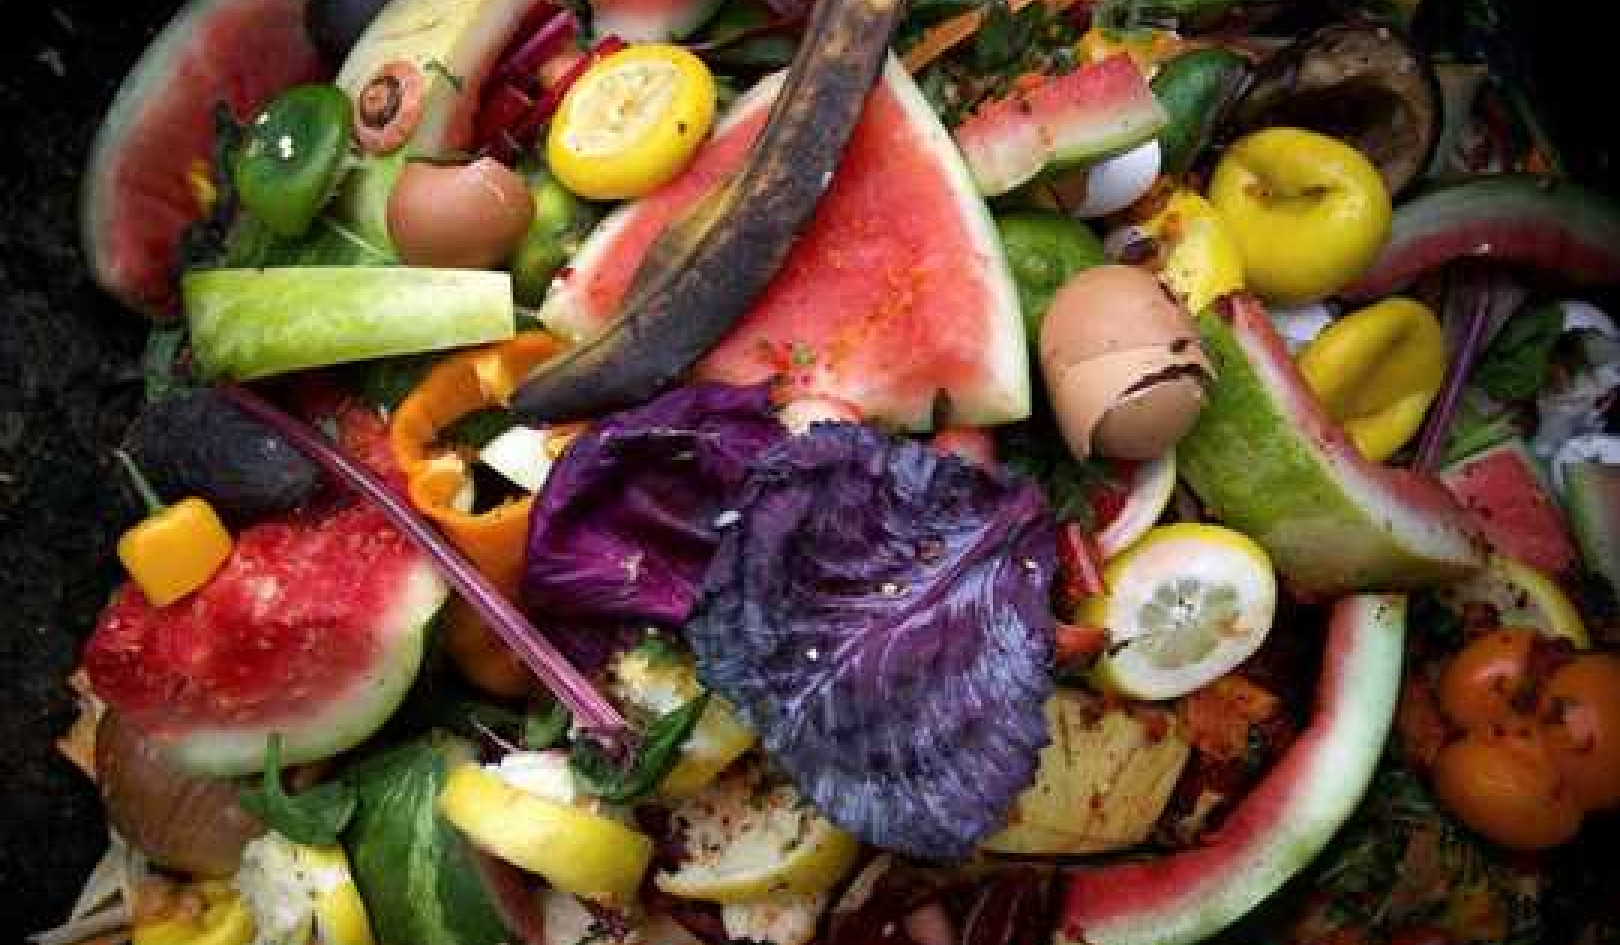 Reduce Your Food Waste To Save Money, Boost Health and Reduce Carbon Emissions